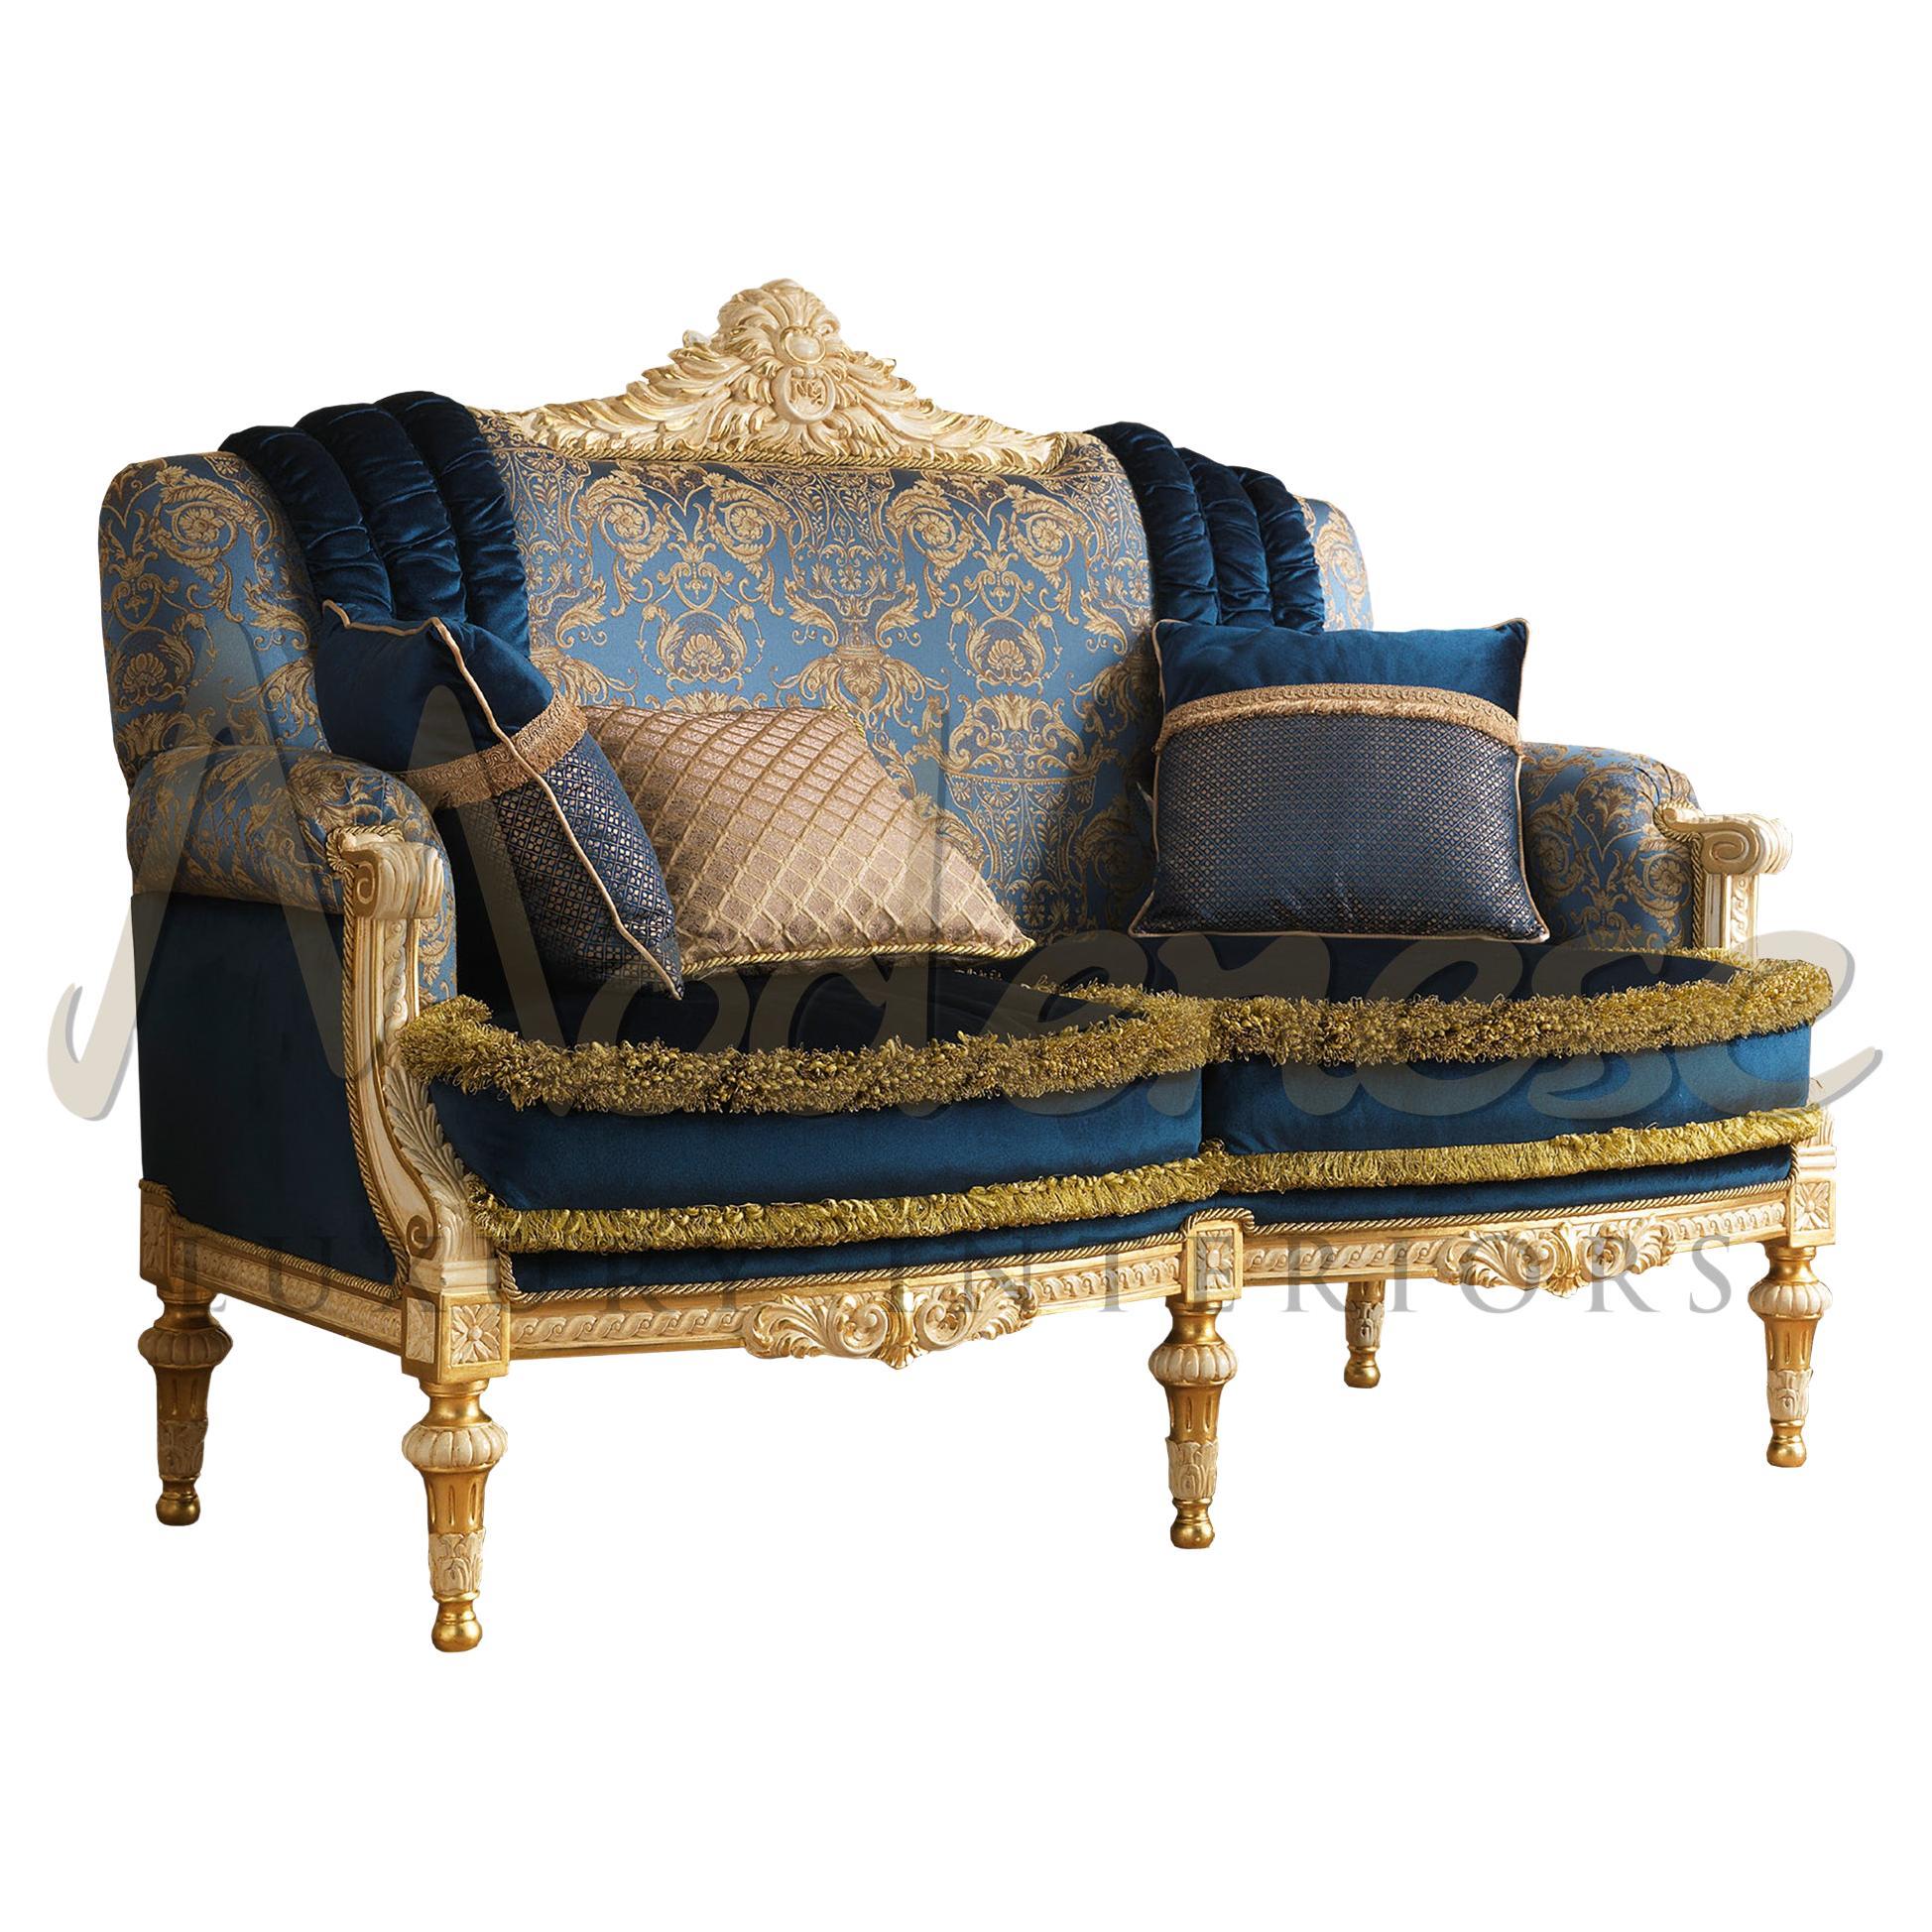 Two Seater Blue Damask Sofa in Gold Leaf Carving by Modenese Interiors For Sale